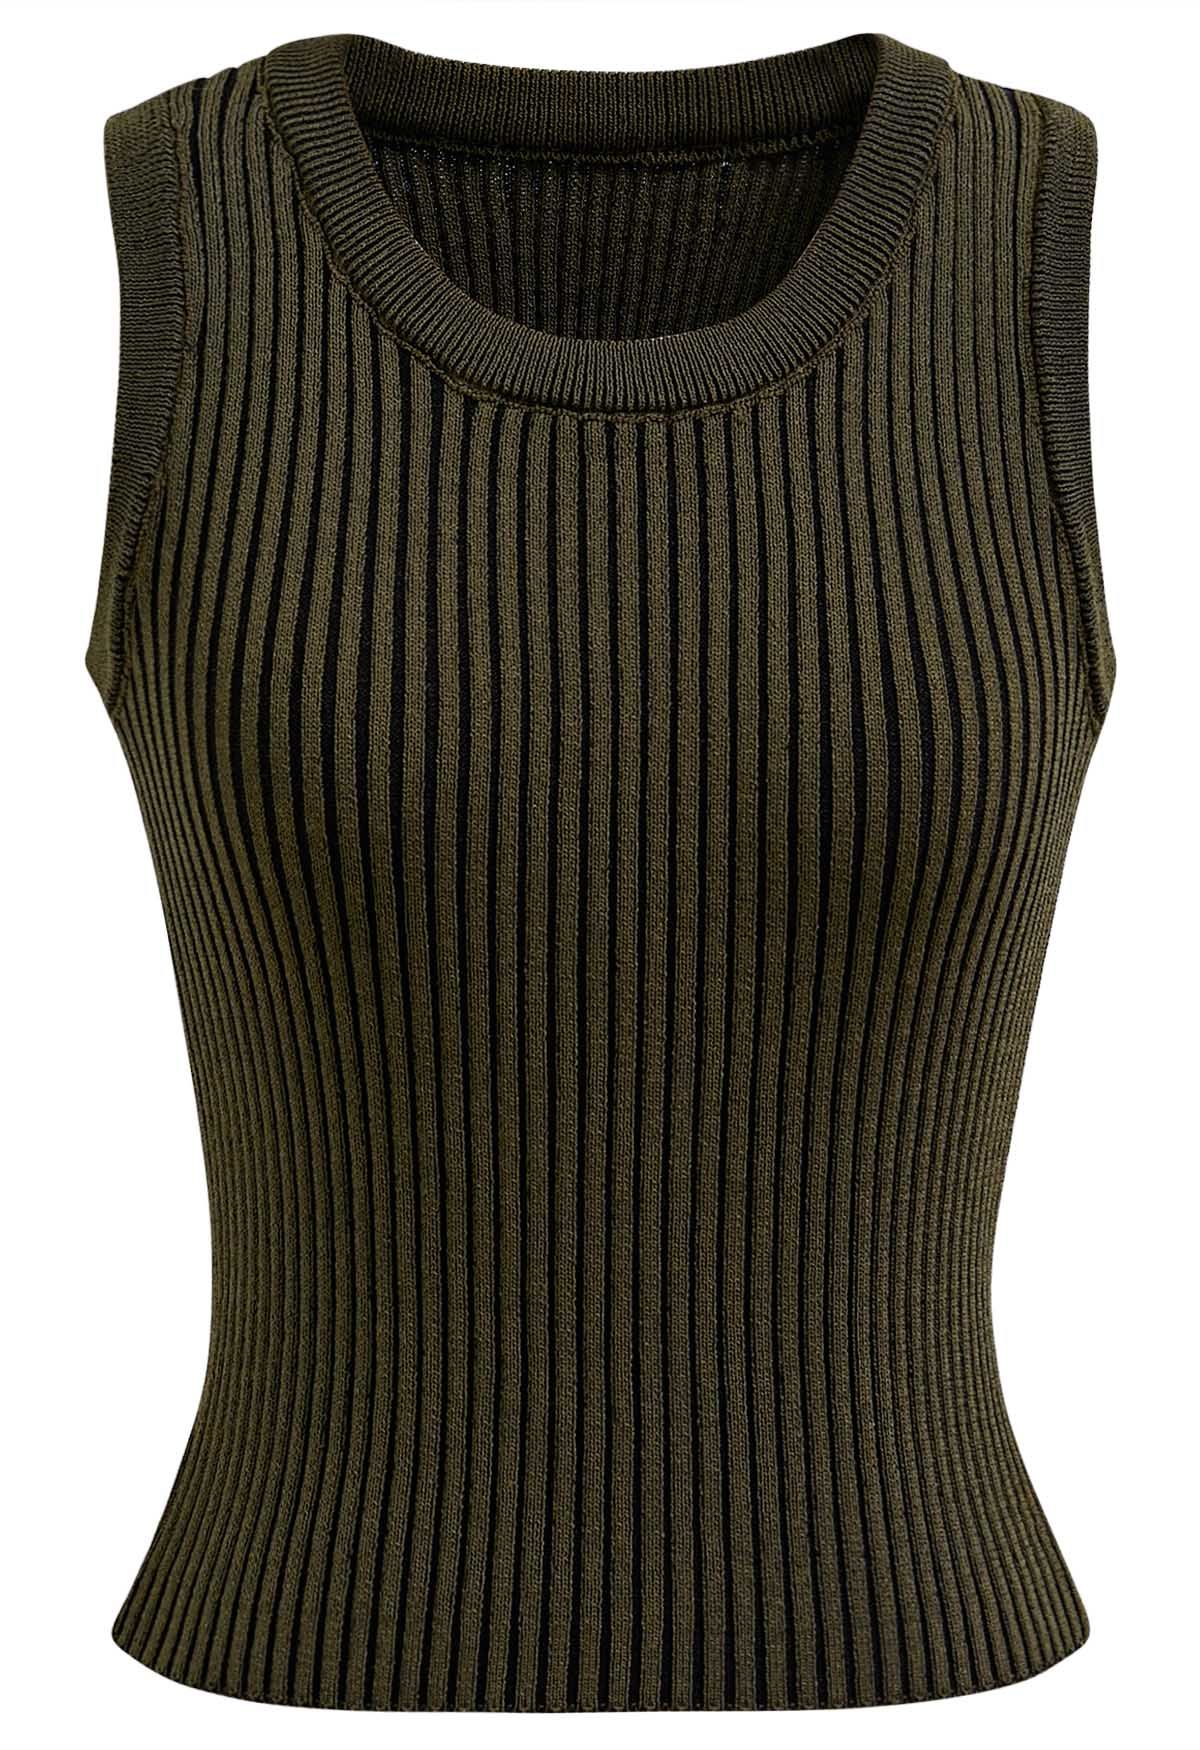 Stripe Texture Knit Tank Top in Army Green